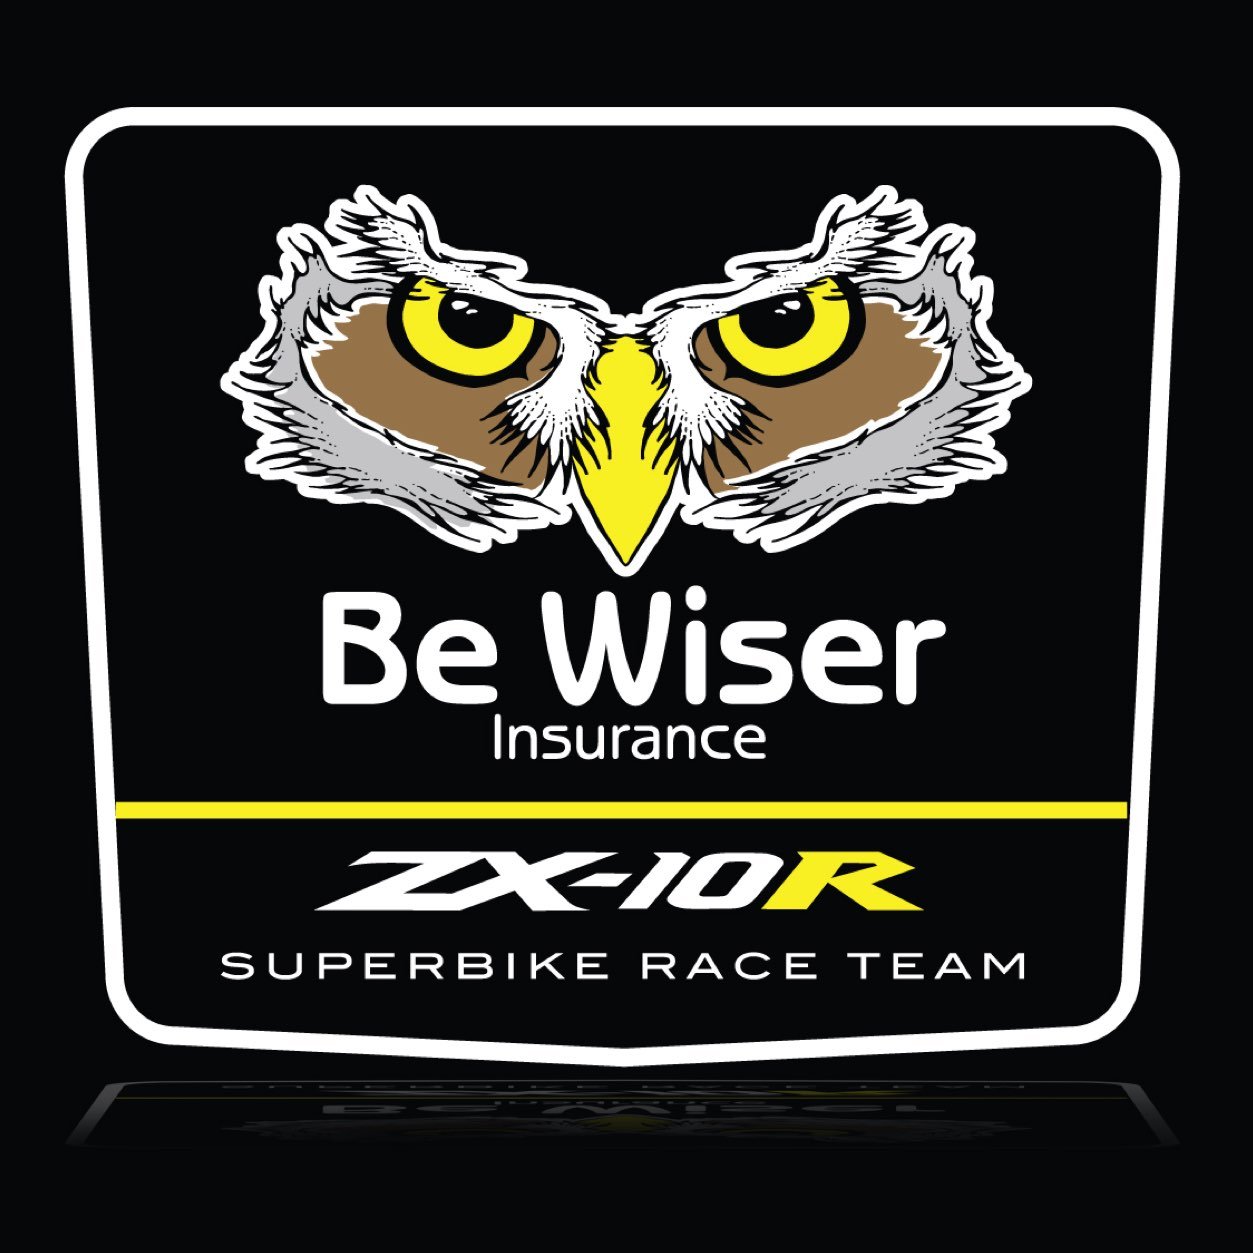 British Superbike Team NEW For 2015 powered by @Kawasaki_news @Bewiser @tommyhill33 Alan Greig